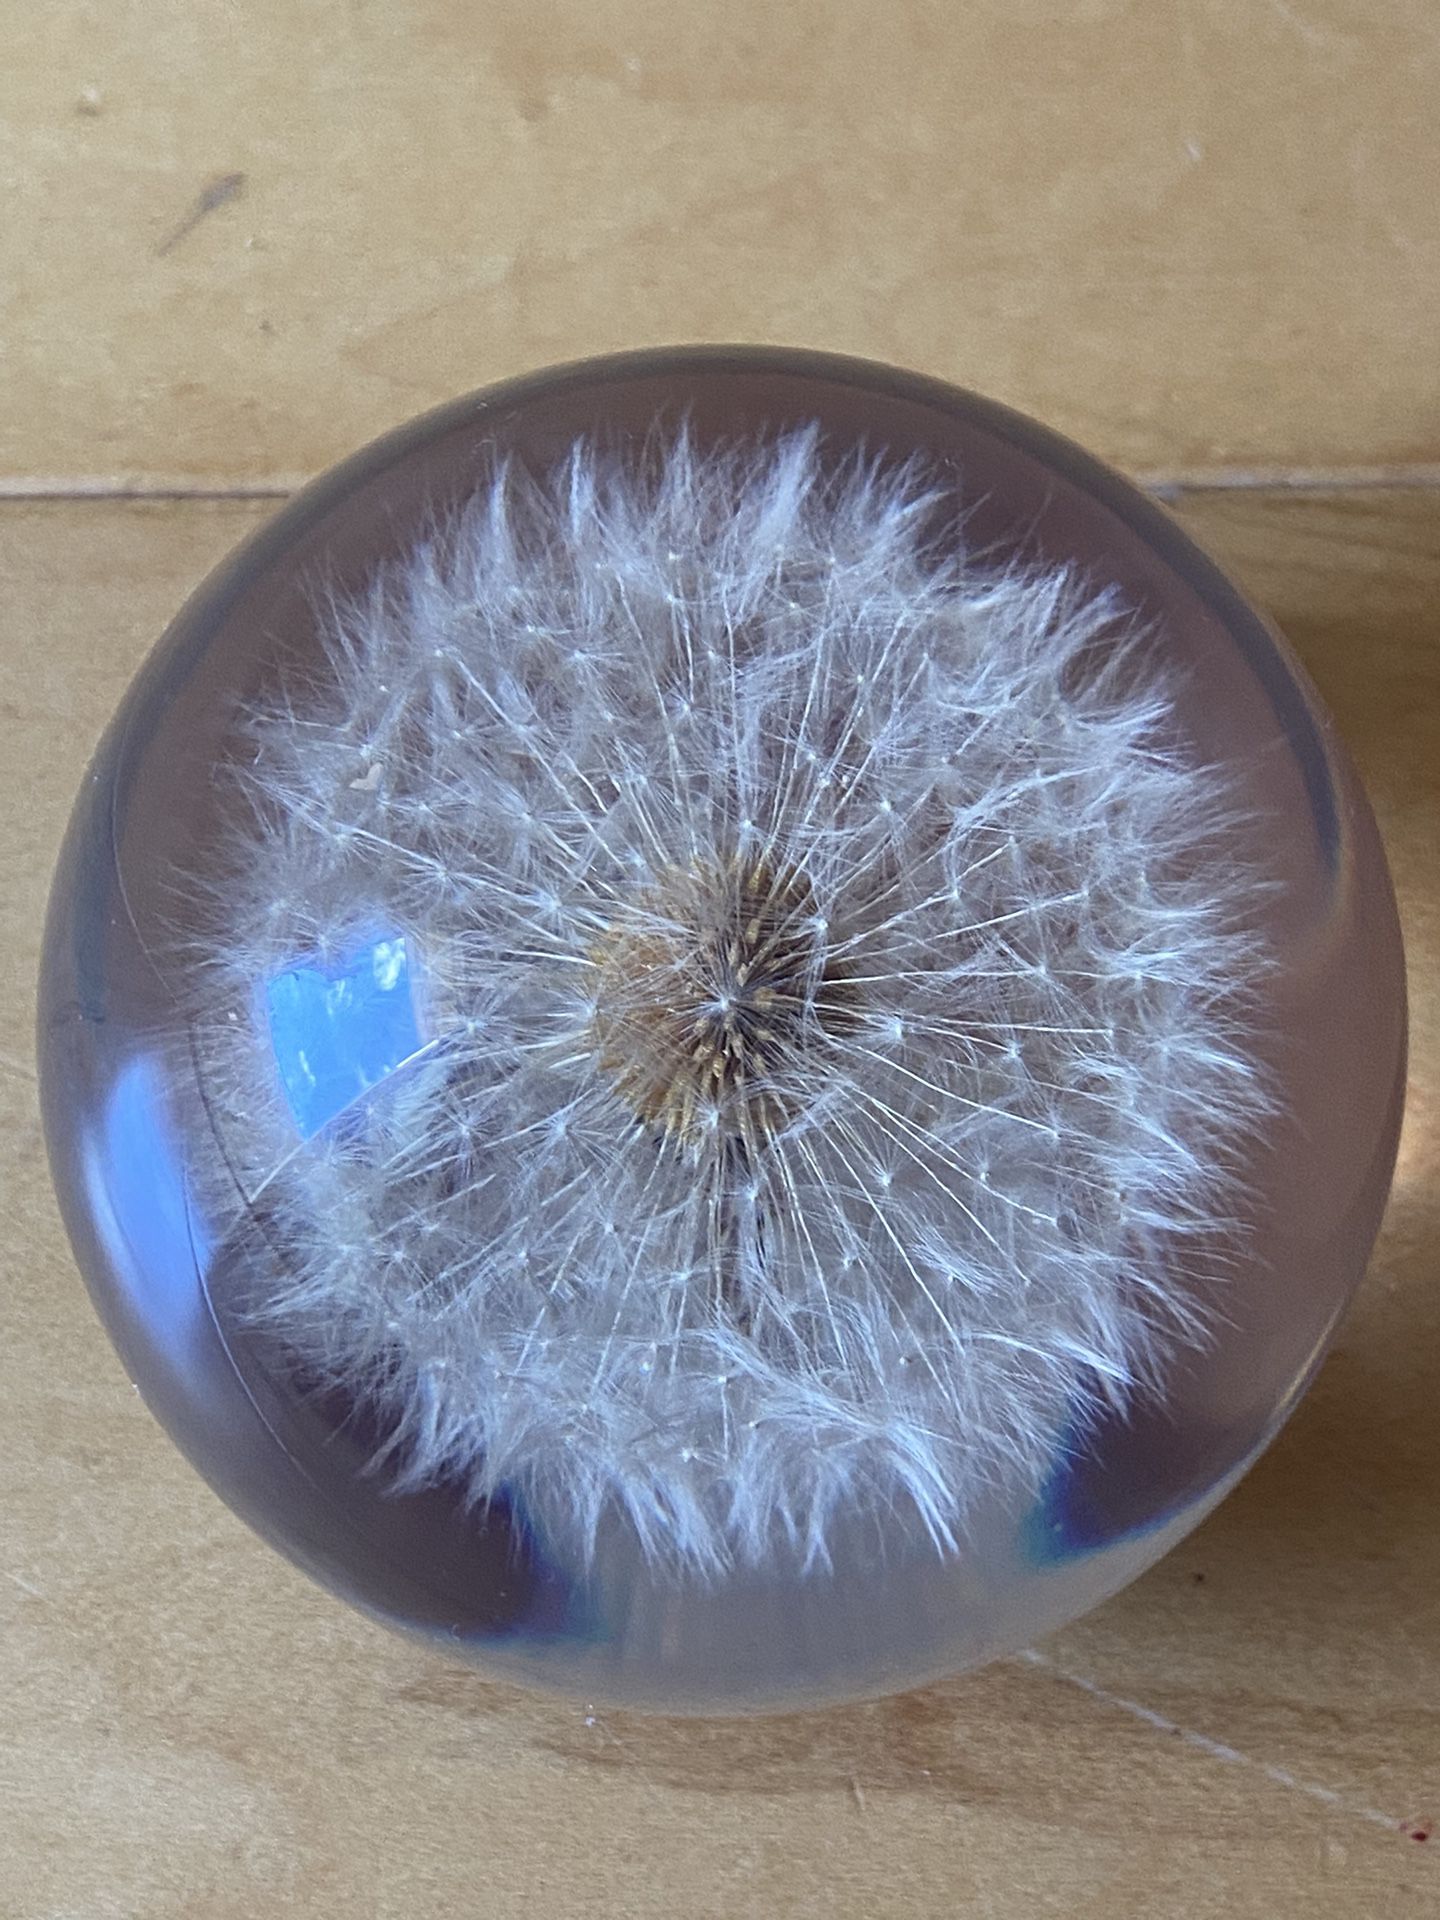 THE ORIGINAL COLLECTION 1993-VINTAGE/DANDELION IN CRYSTAL GLASS PAPERWEIGHT/DECOR (MADE IN GREAT BRITAIN)